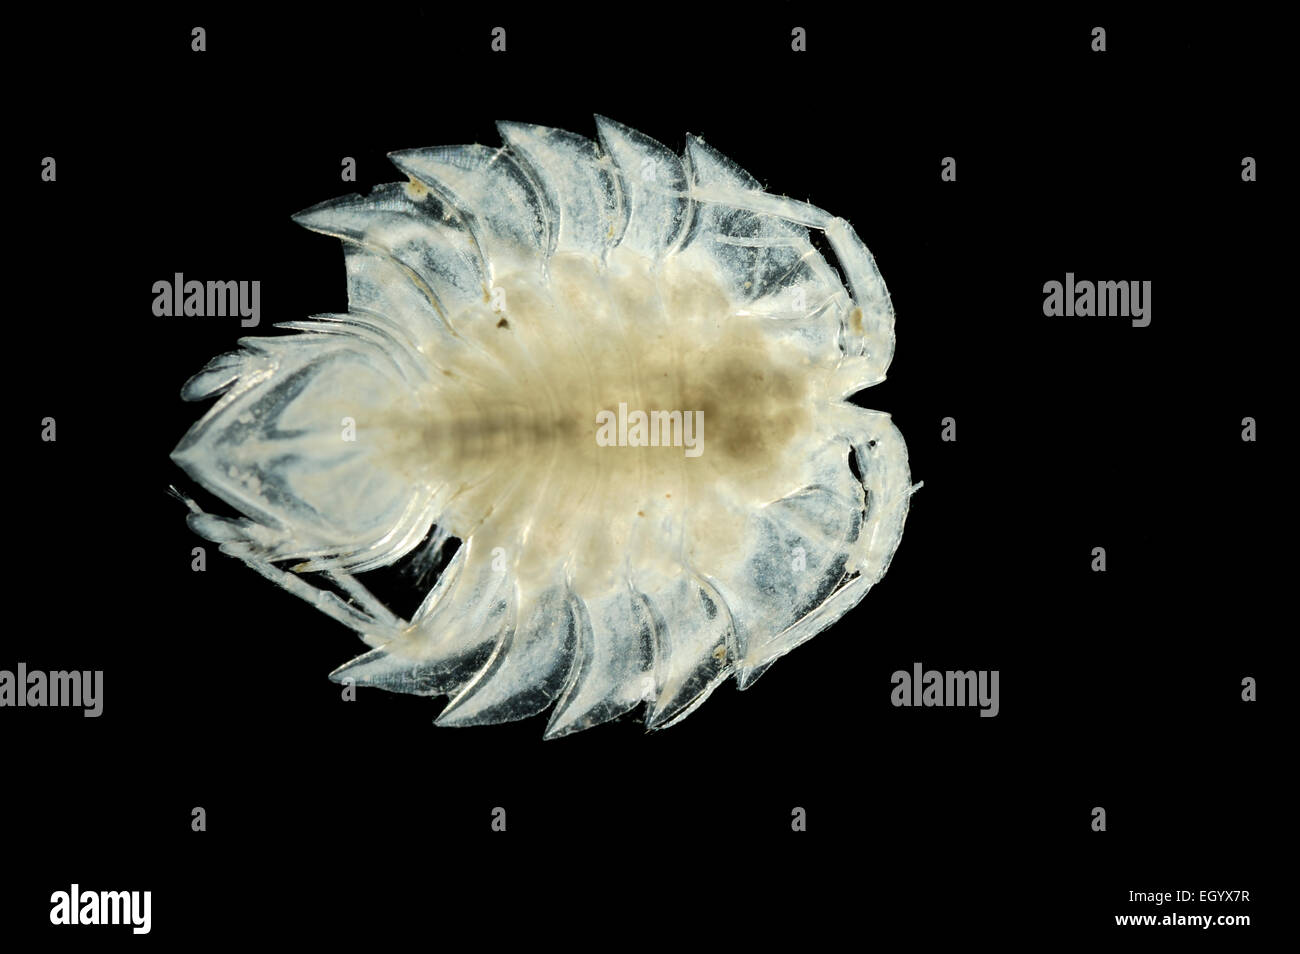 isopod (Frontoserolis abyssalis) Picture was taken in cooperation with the Zoological Museum University of Hamburg | Antarktisch Stock Photo